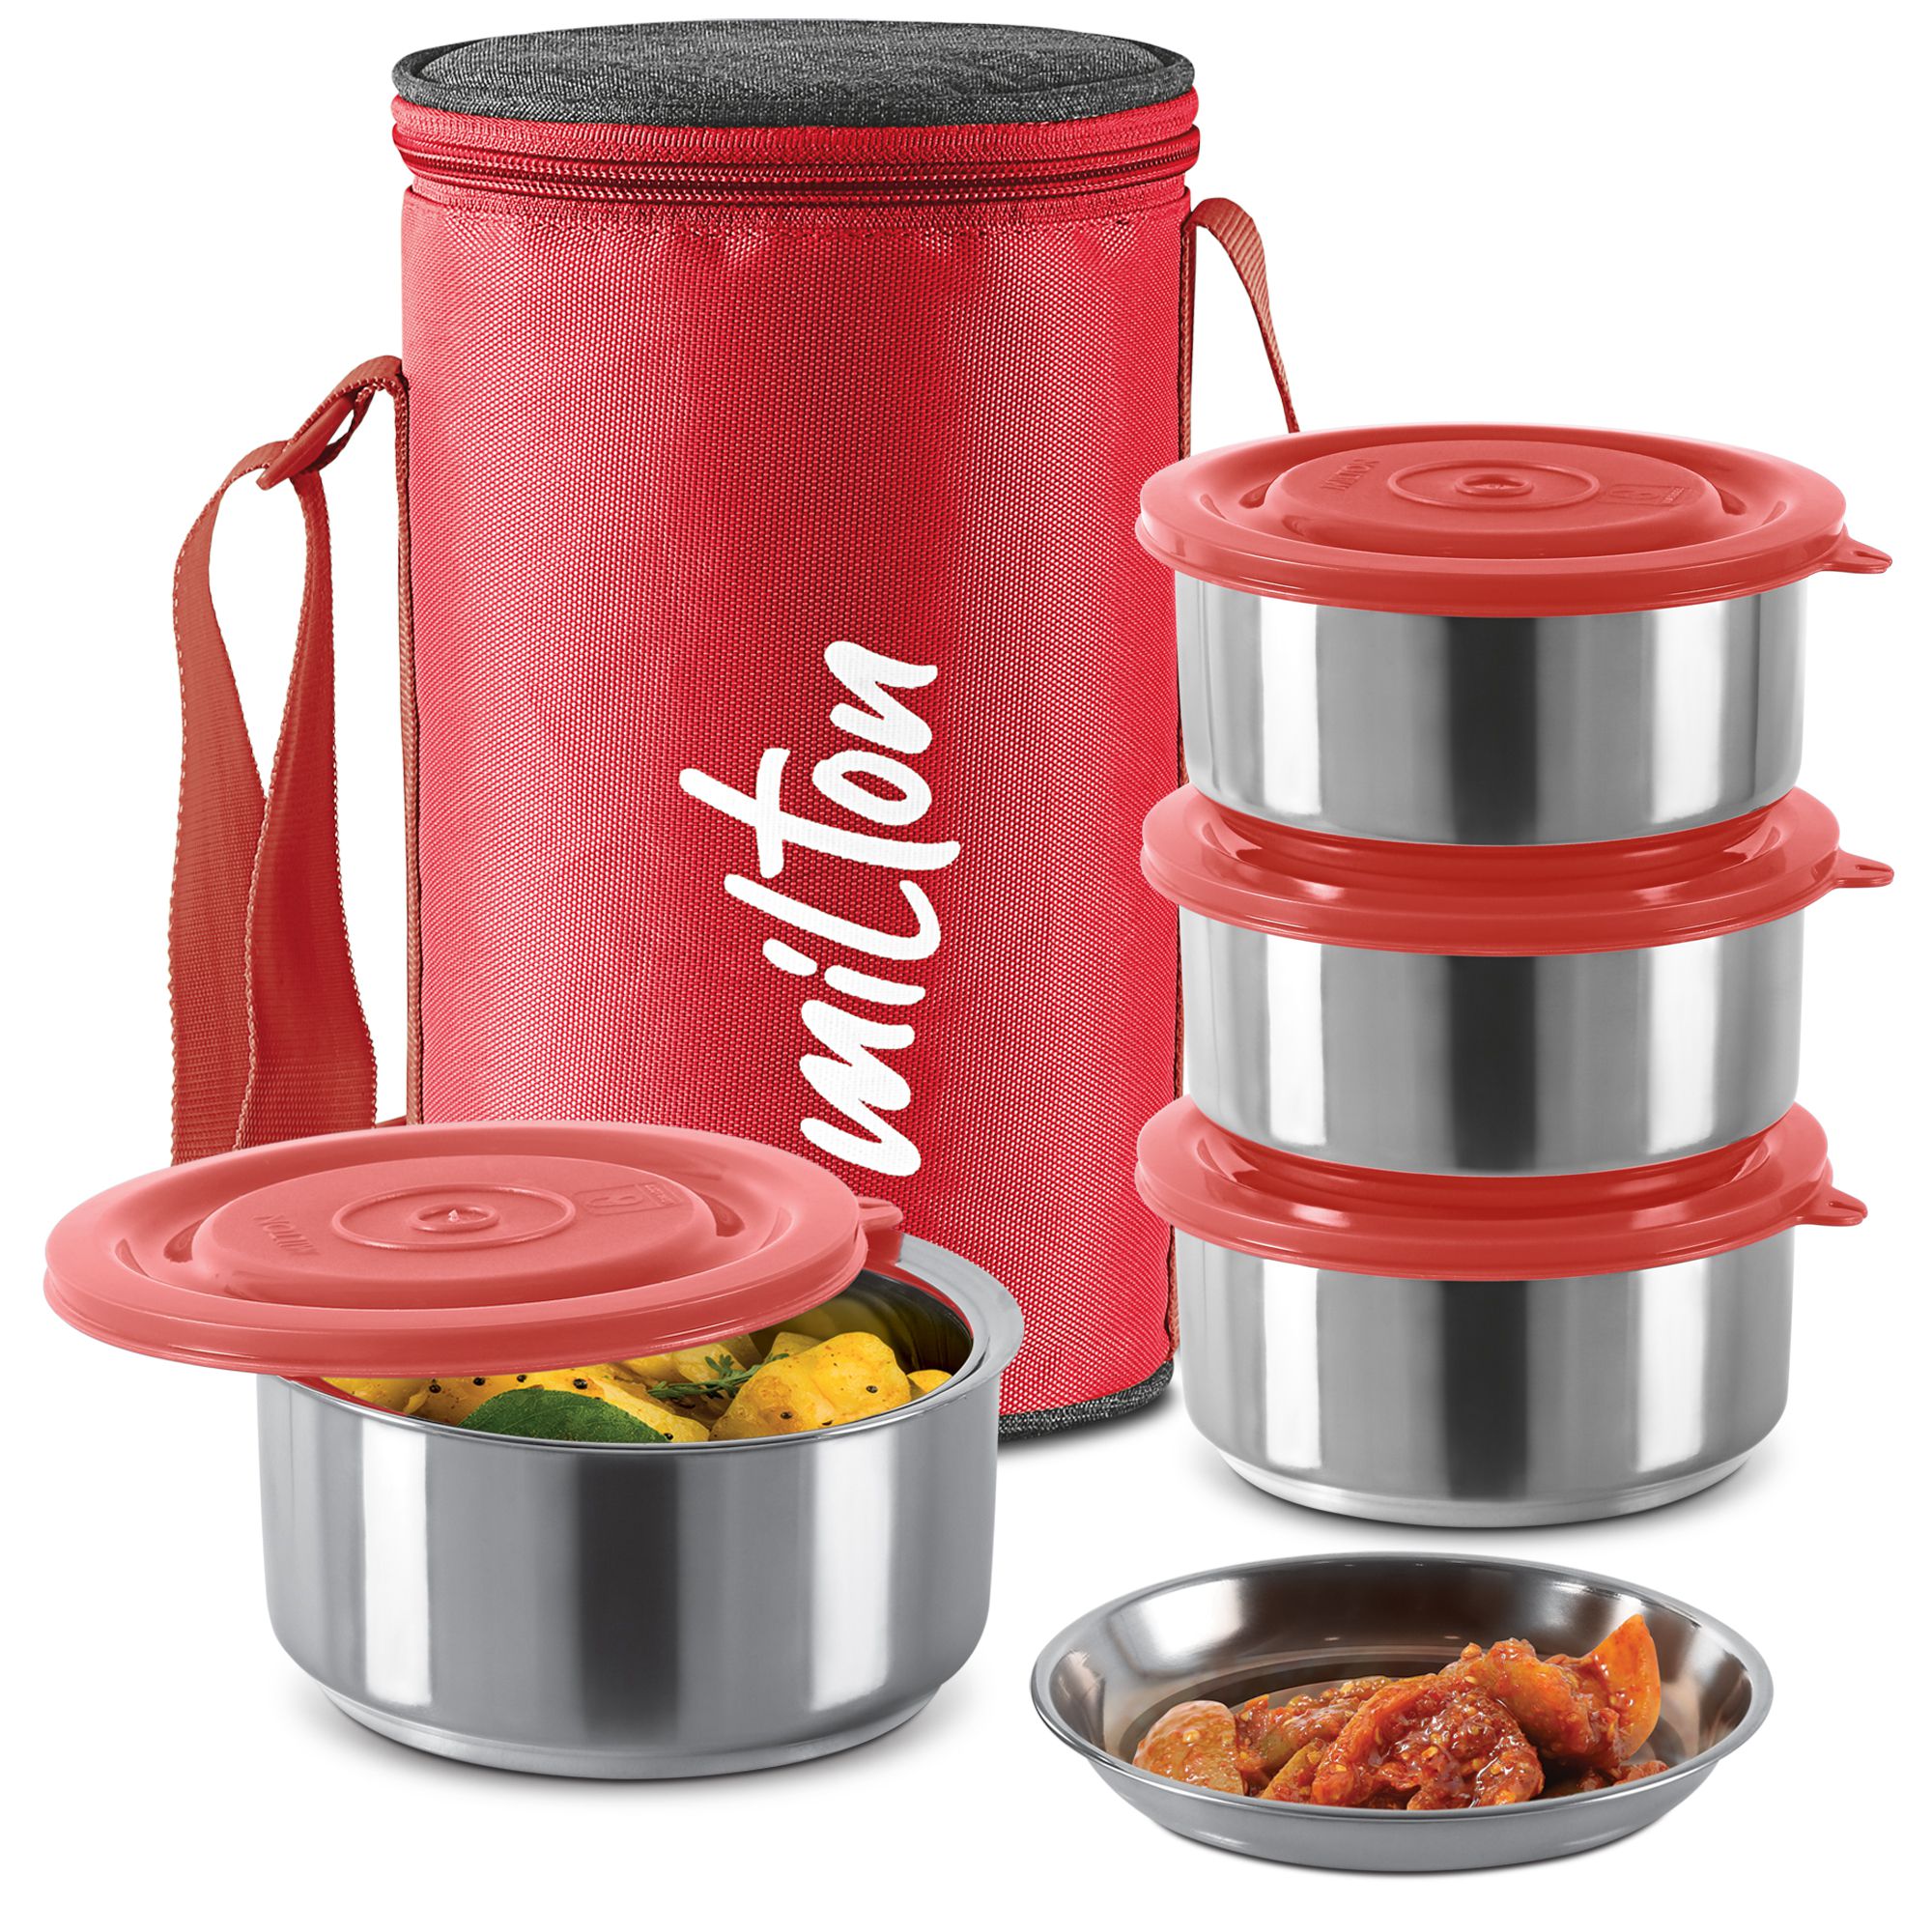     			Milton Ambition 4 Stainless Steel Tiffin, 4 Containers (300 ml Each with Jacket) Red